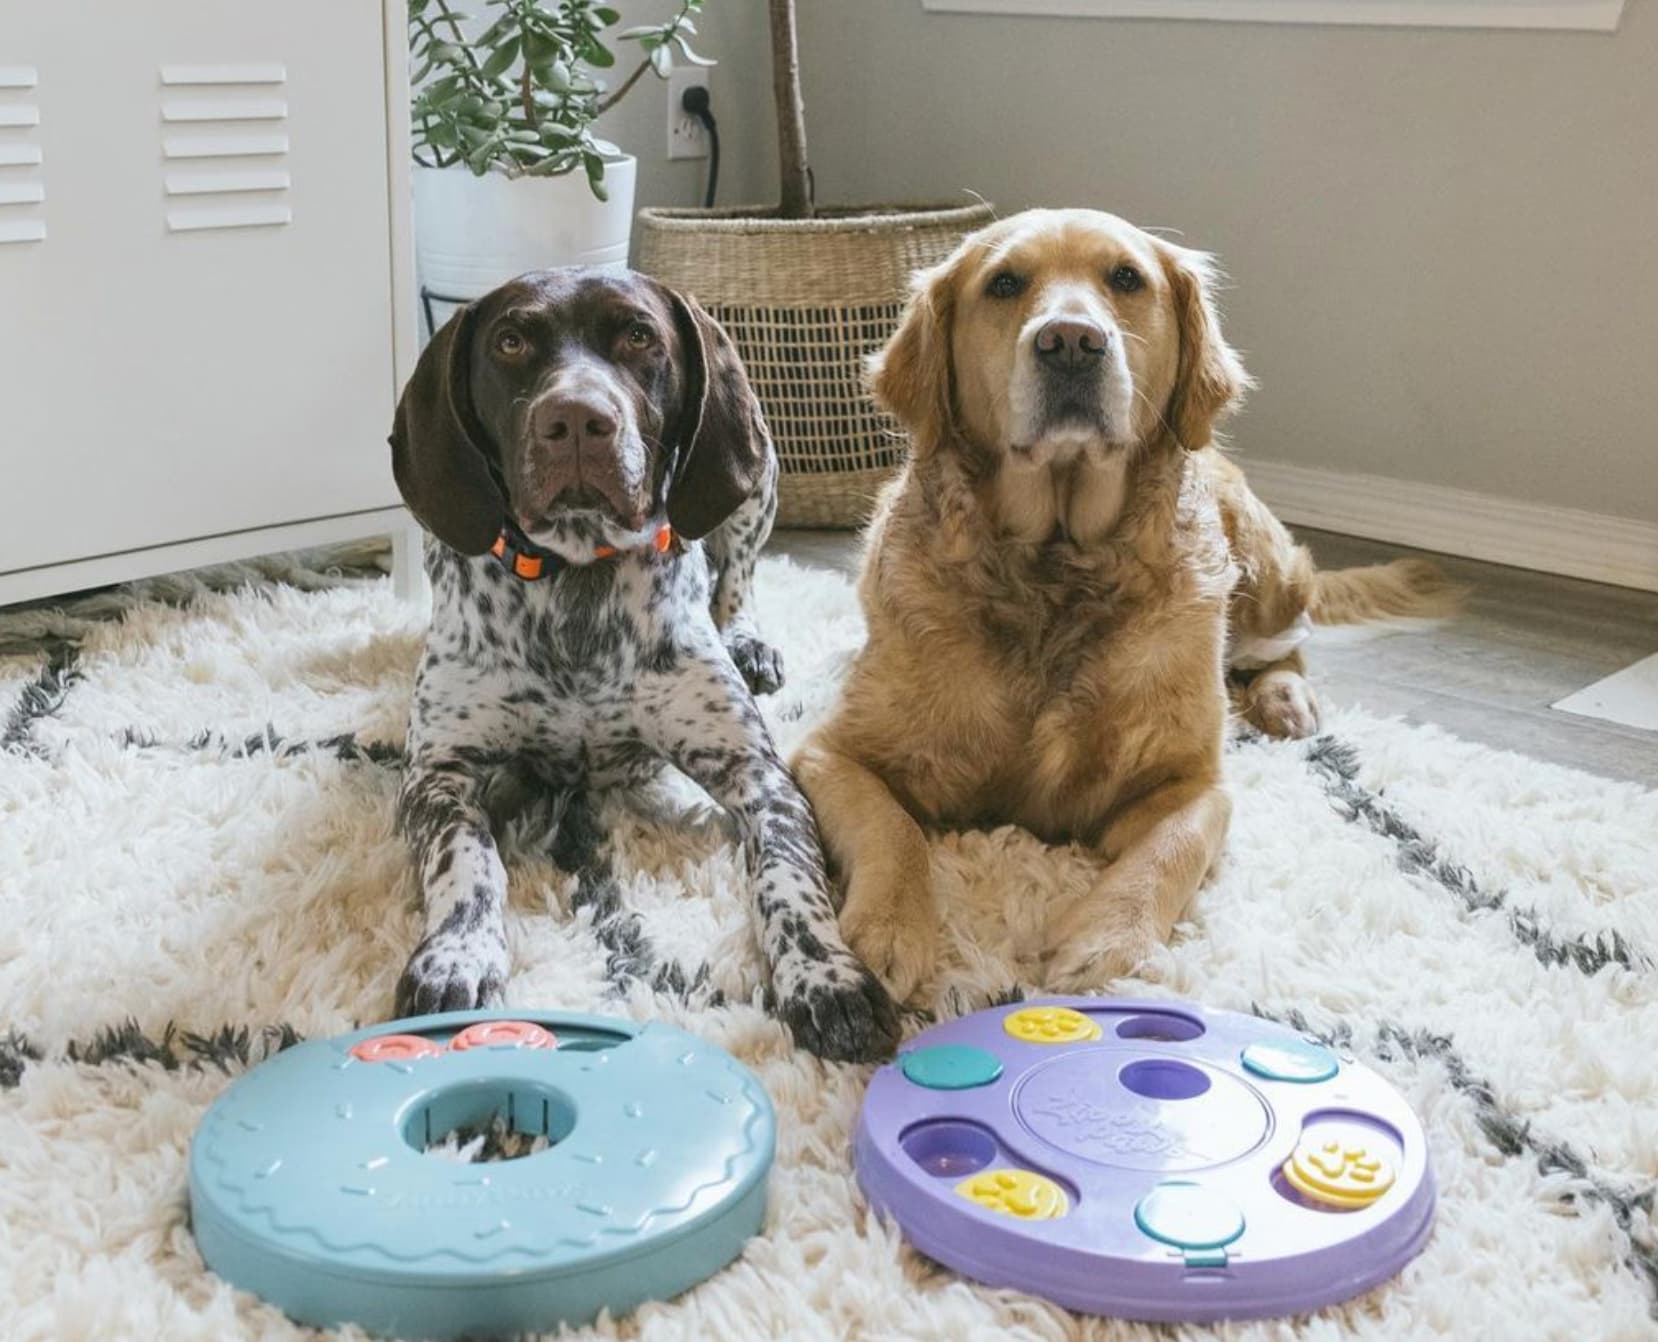 Best dog puzzles: Are these enrichment toys actually any good